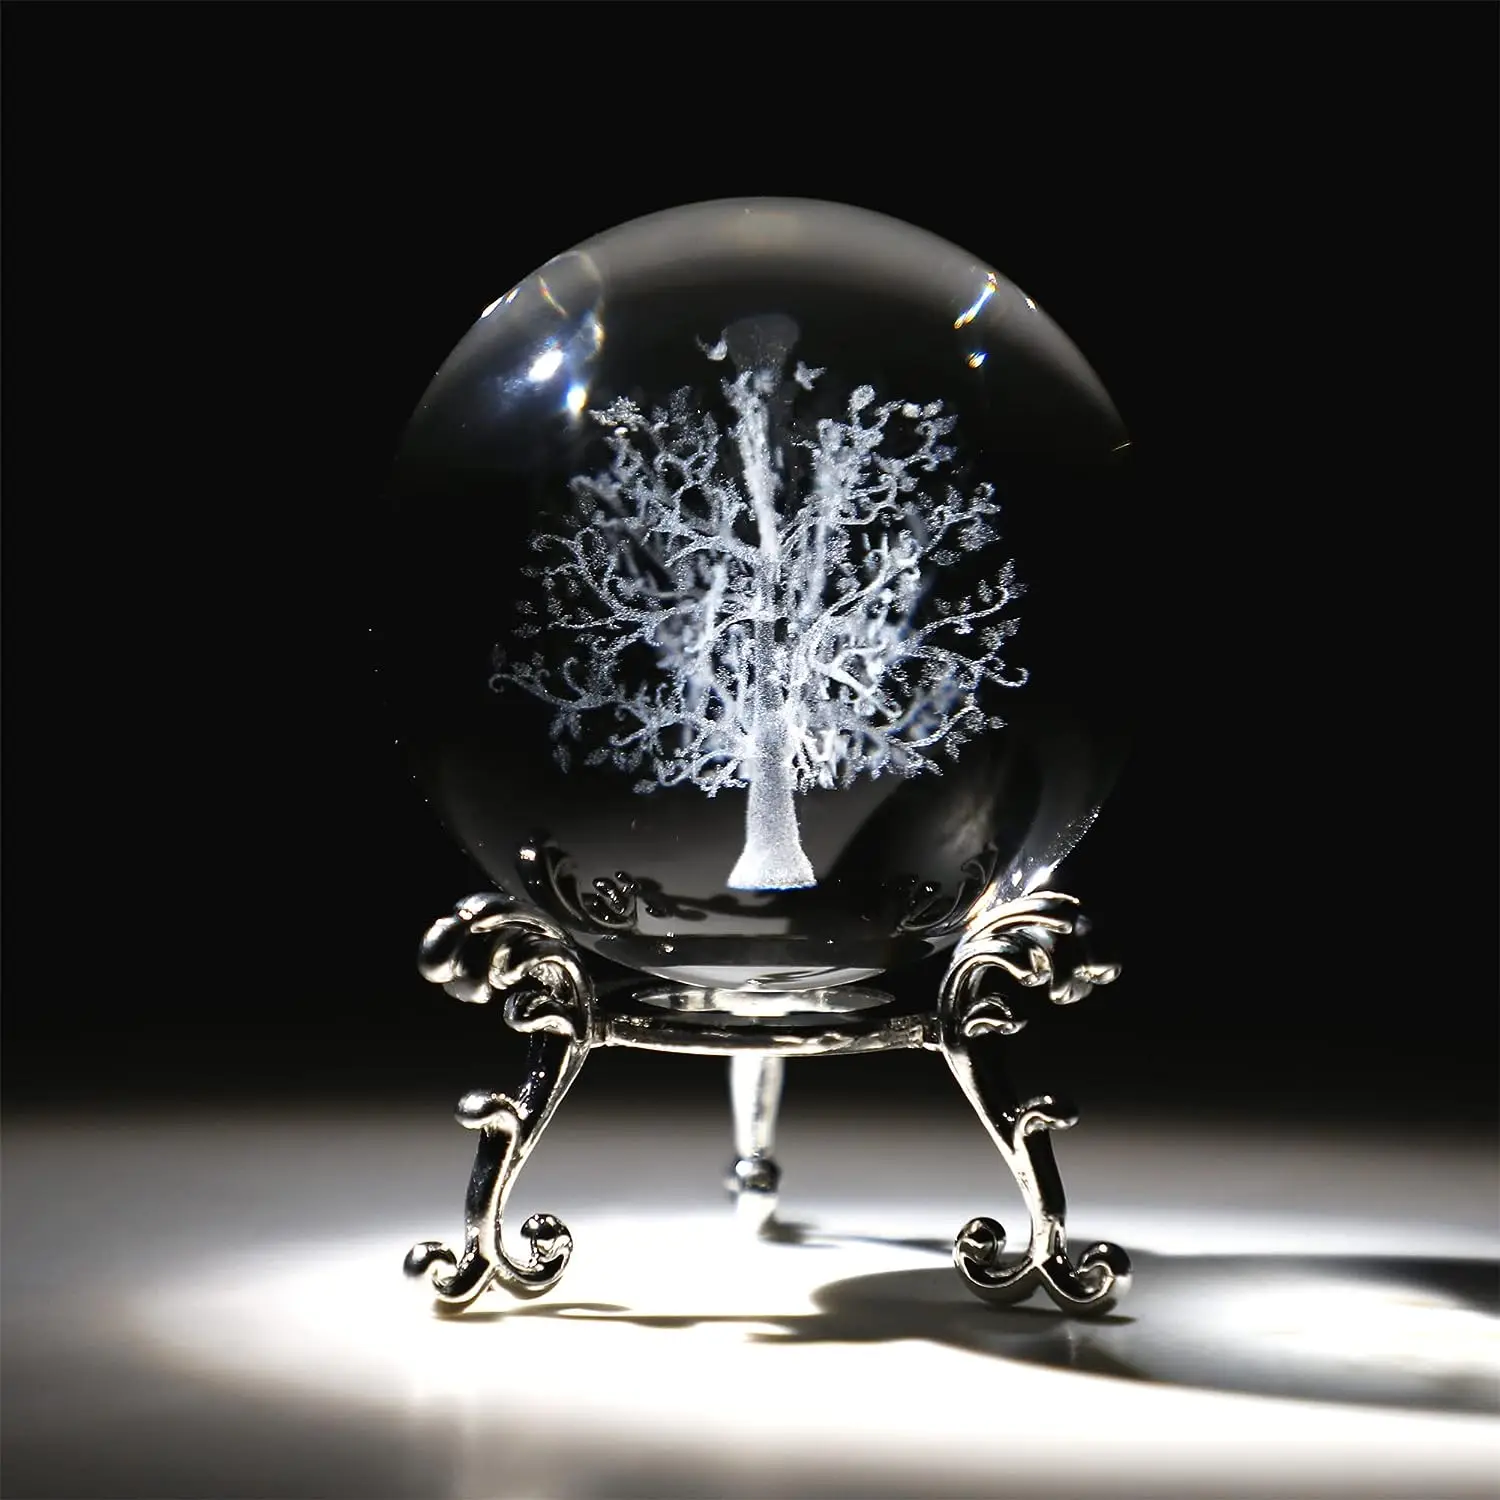 H&D 60mm Tree of Life Crystal Ball with Stand Decorative Paperweight 3D Laser Engraved Glass Plant Sphere Novelty Home Decor